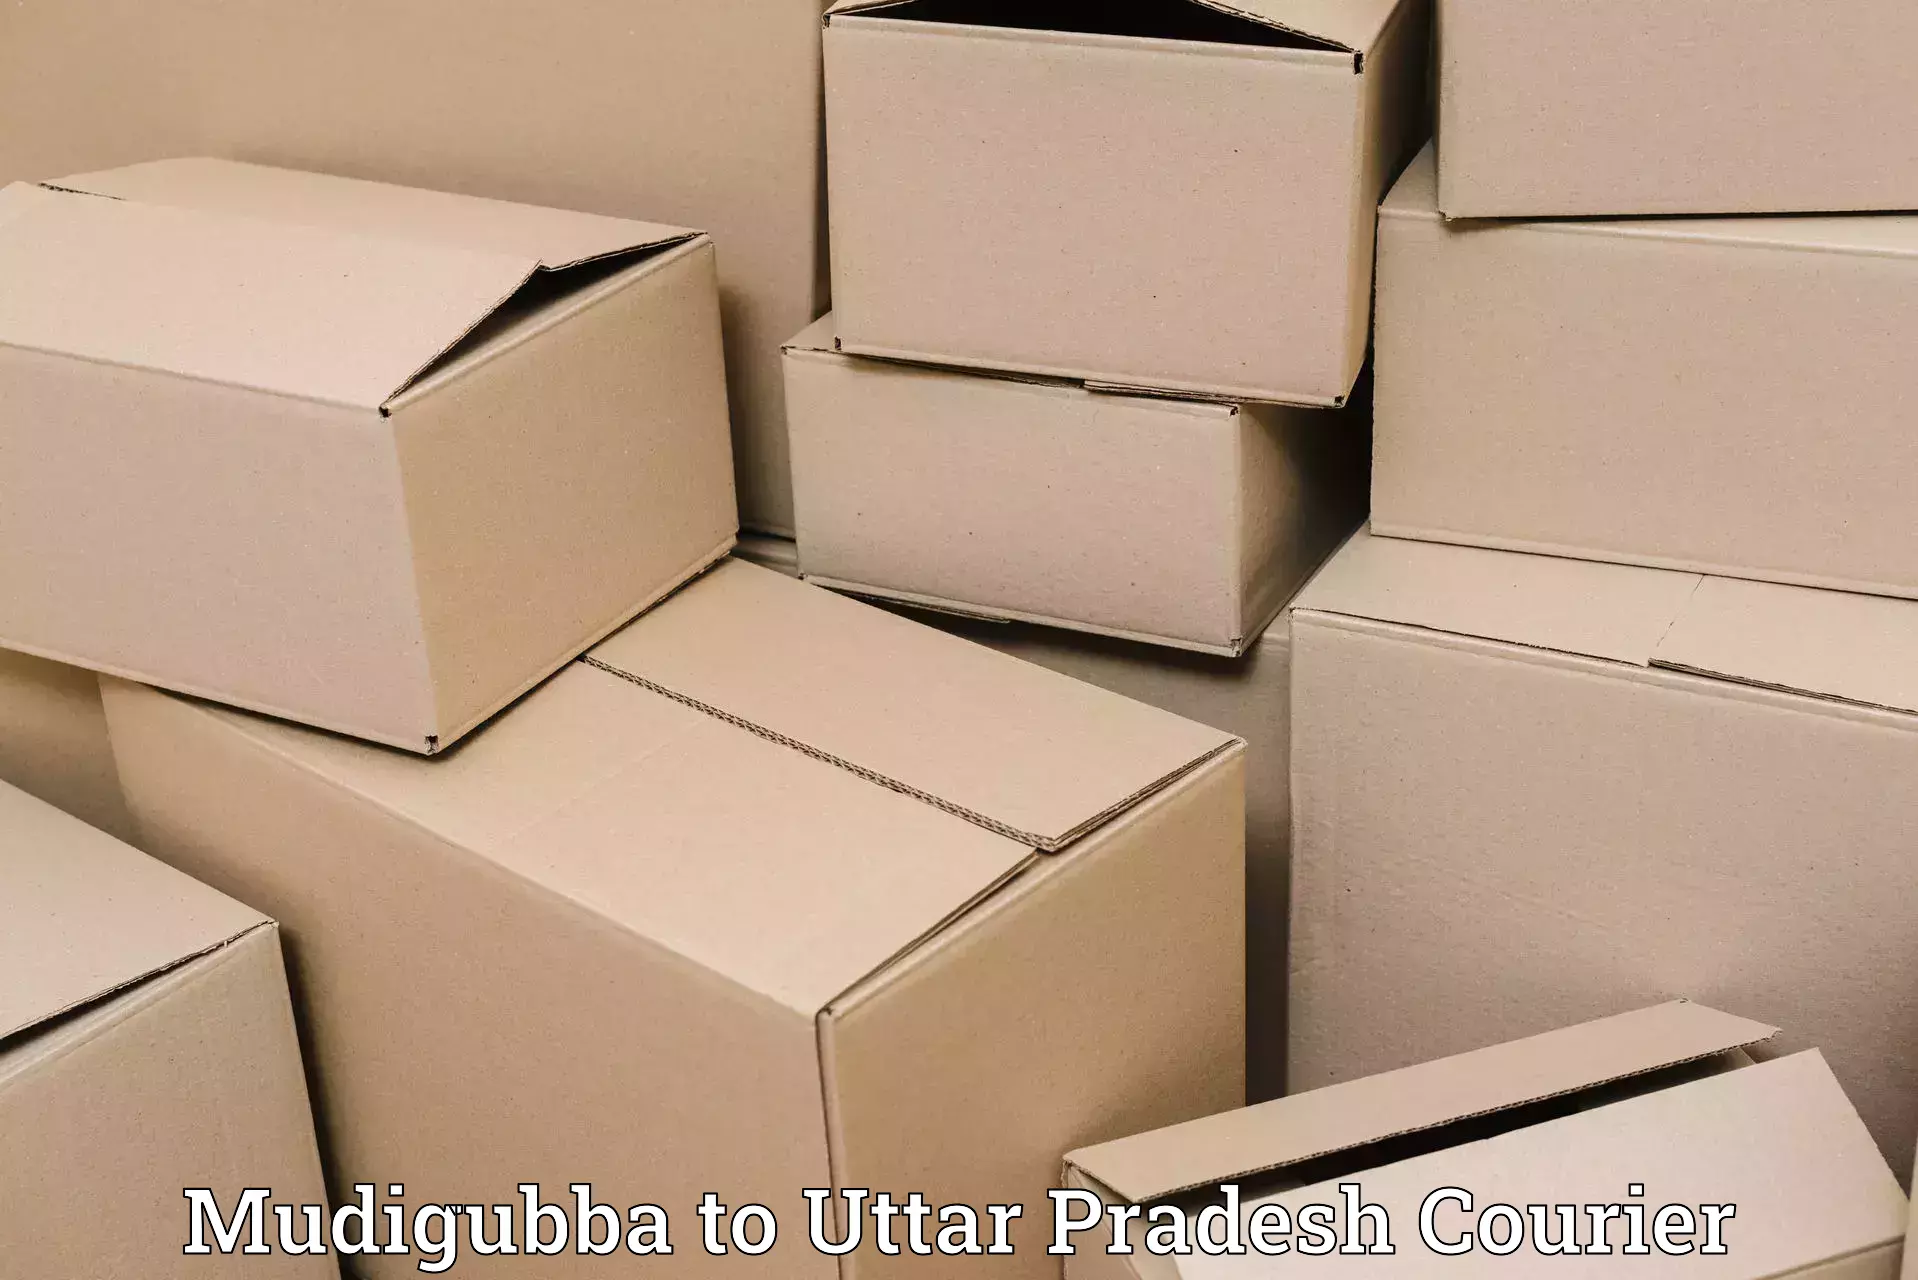 24/7 courier service Mudigubba to IIIT Lucknow